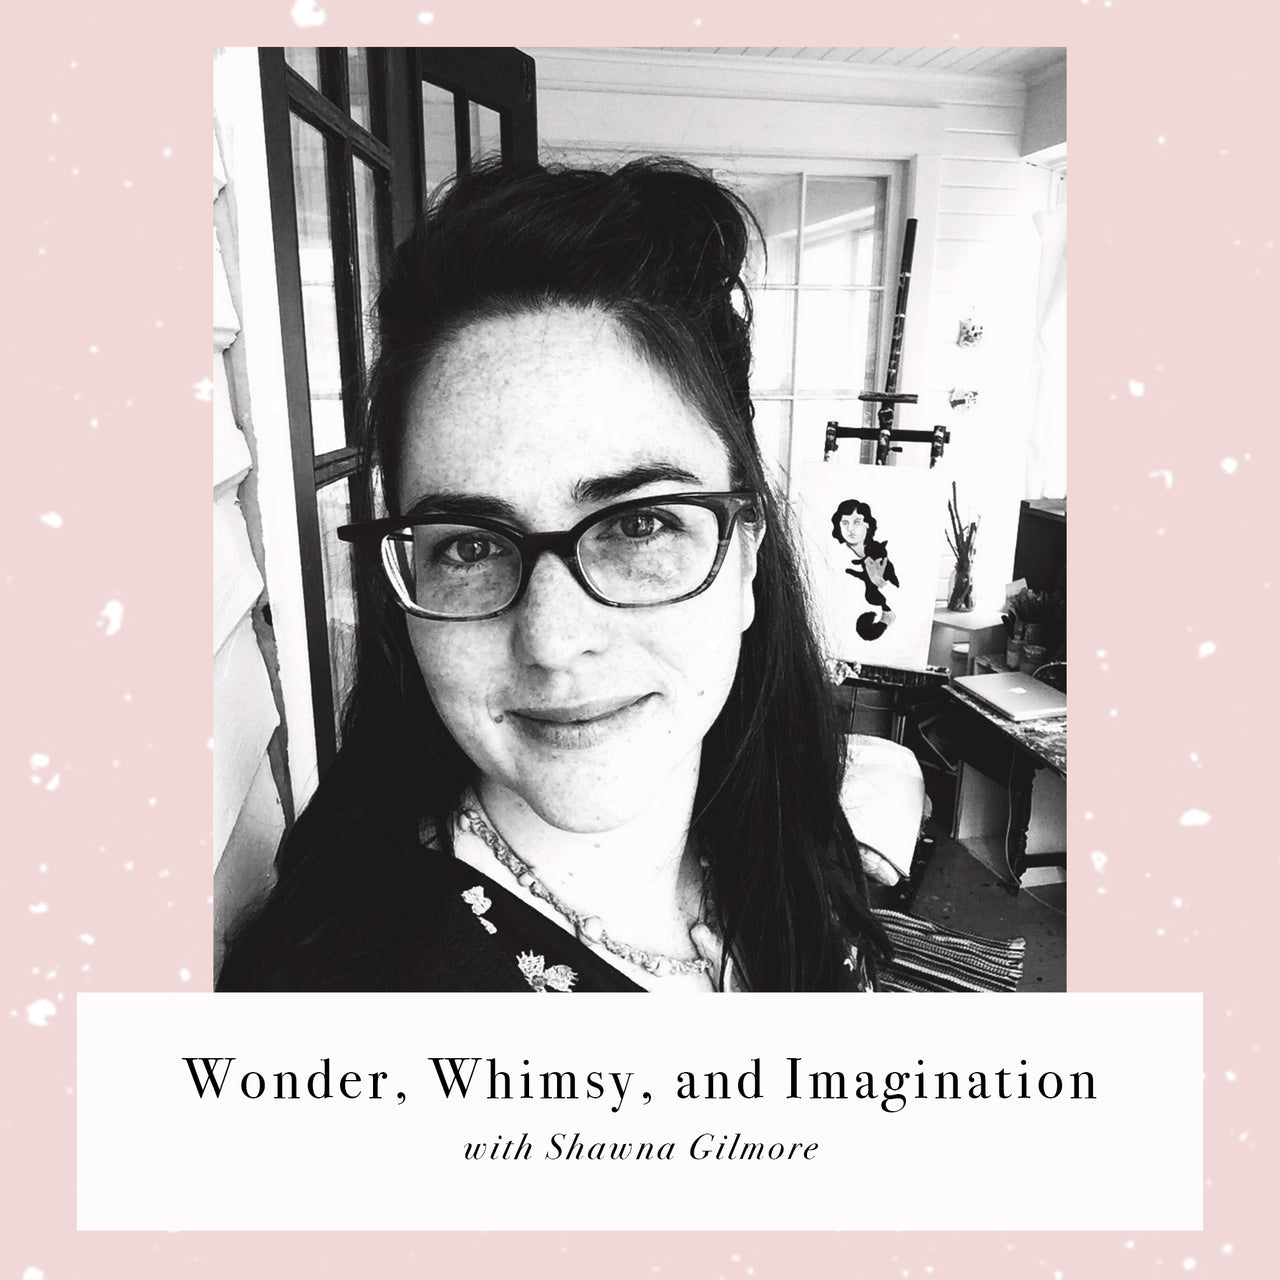 Wonder, Whimsy, and Imagination: Interview with Shawna Gilmore